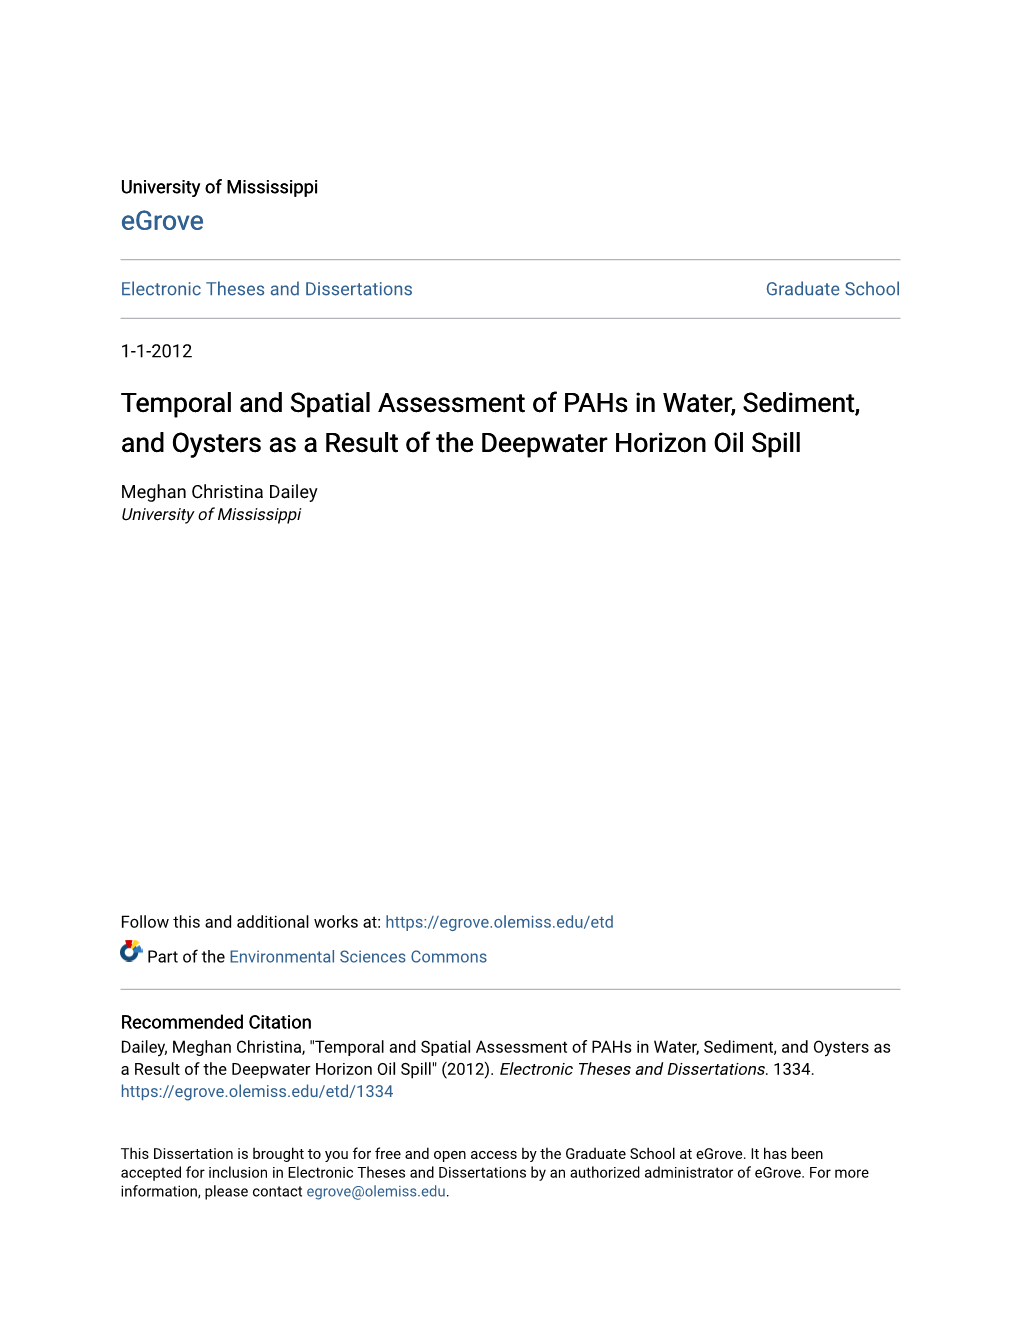 Temporal and Spatial Assessment of Pahs in Water, Sediment, and Oysters As a Result of the Deepwater Horizon Oil Spill